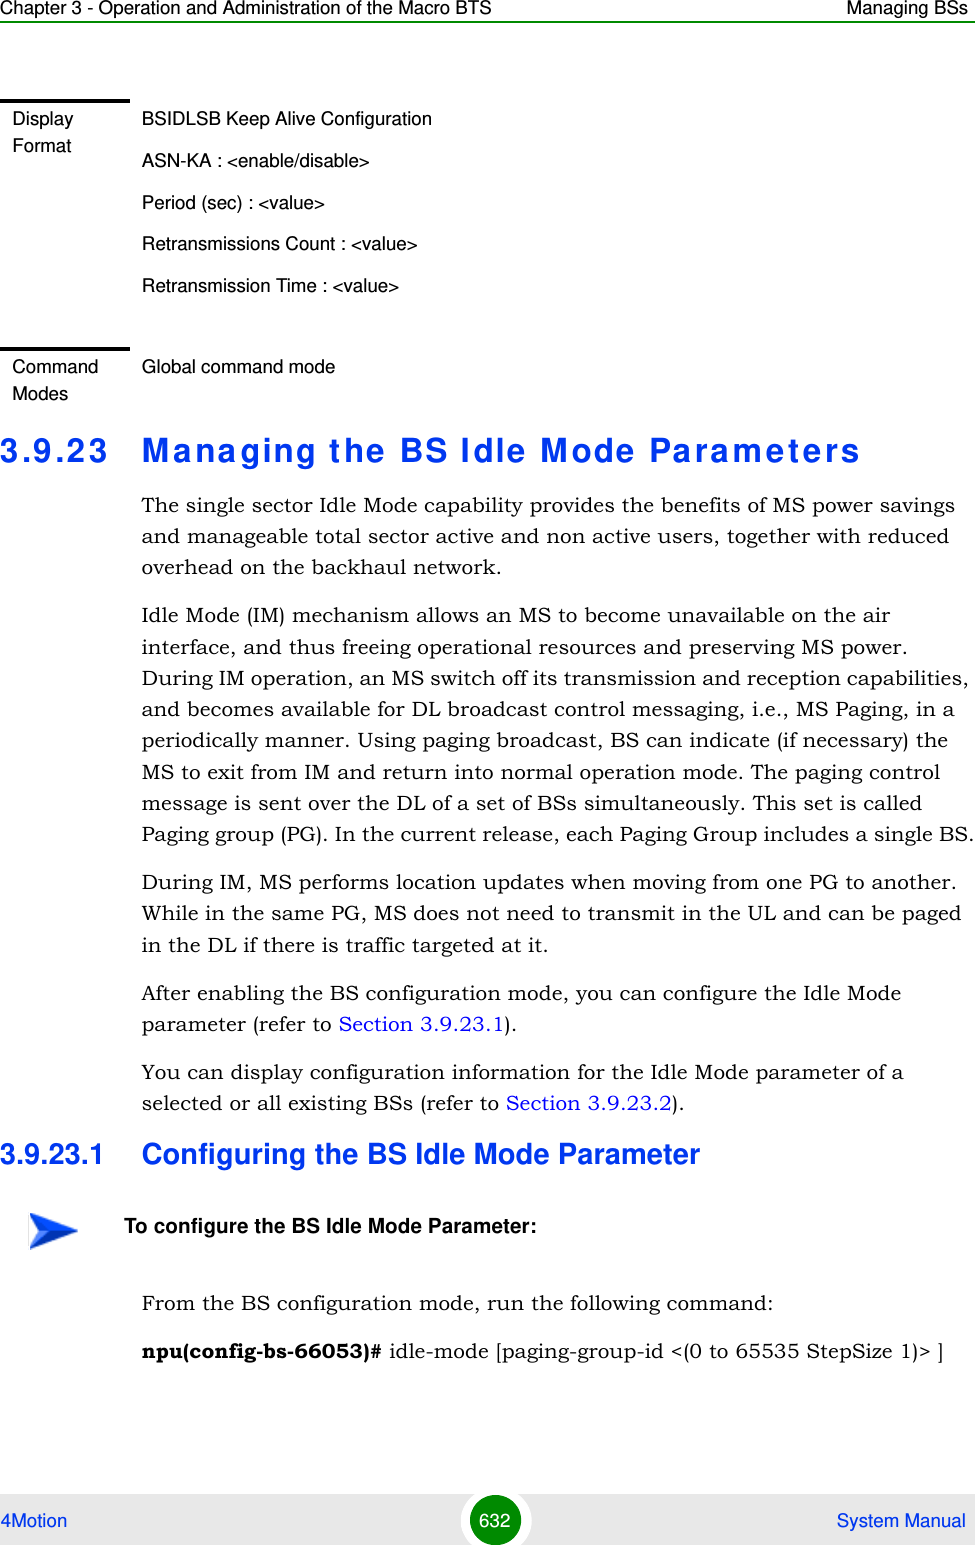 Chapter 3 - Operation and Administration of the Macro BTS Managing BSs4Motion 632  System Manual3.9 .23 Managing the BS Idle Mode  ParametersThe single sector Idle Mode capability provides the benefits of MS power savings and manageable total sector active and non active users, together with reduced overhead on the backhaul network.Idle Mode (IM) mechanism allows an MS to become unavailable on the air interface, and thus freeing operational resources and preserving MS power. During IM operation, an MS switch off its transmission and reception capabilities, and becomes available for DL broadcast control messaging, i.e., MS Paging, in a periodically manner. Using paging broadcast, BS can indicate (if necessary) the MS to exit from IM and return into normal operation mode. The paging control message is sent over the DL of a set of BSs simultaneously. This set is called Paging group (PG). In the current release, each Paging Group includes a single BS.During IM, MS performs location updates when moving from one PG to another. While in the same PG, MS does not need to transmit in the UL and can be paged in the DL if there is traffic targeted at it.After enabling the BS configuration mode, you can configure the Idle Mode parameter (refer to Section 3.9.23.1).You can display configuration information for the Idle Mode parameter of a selected or all existing BSs (refer to Section 3.9.23.2).3.9.23.1 Configuring the BS Idle Mode ParameterFrom the BS configuration mode, run the following command:npu(config-bs-66053)# idle-mode [paging-group-id &lt;(0 to 65535 StepSize 1)&gt; ]   Display FormatBSIDLSB Keep Alive ConfigurationASN-KA : &lt;enable/disable&gt;Period (sec) : &lt;value&gt;Retransmissions Count : &lt;value&gt;Retransmission Time : &lt;value&gt;Command ModesGlobal command modeTo configure the BS Idle Mode Parameter: